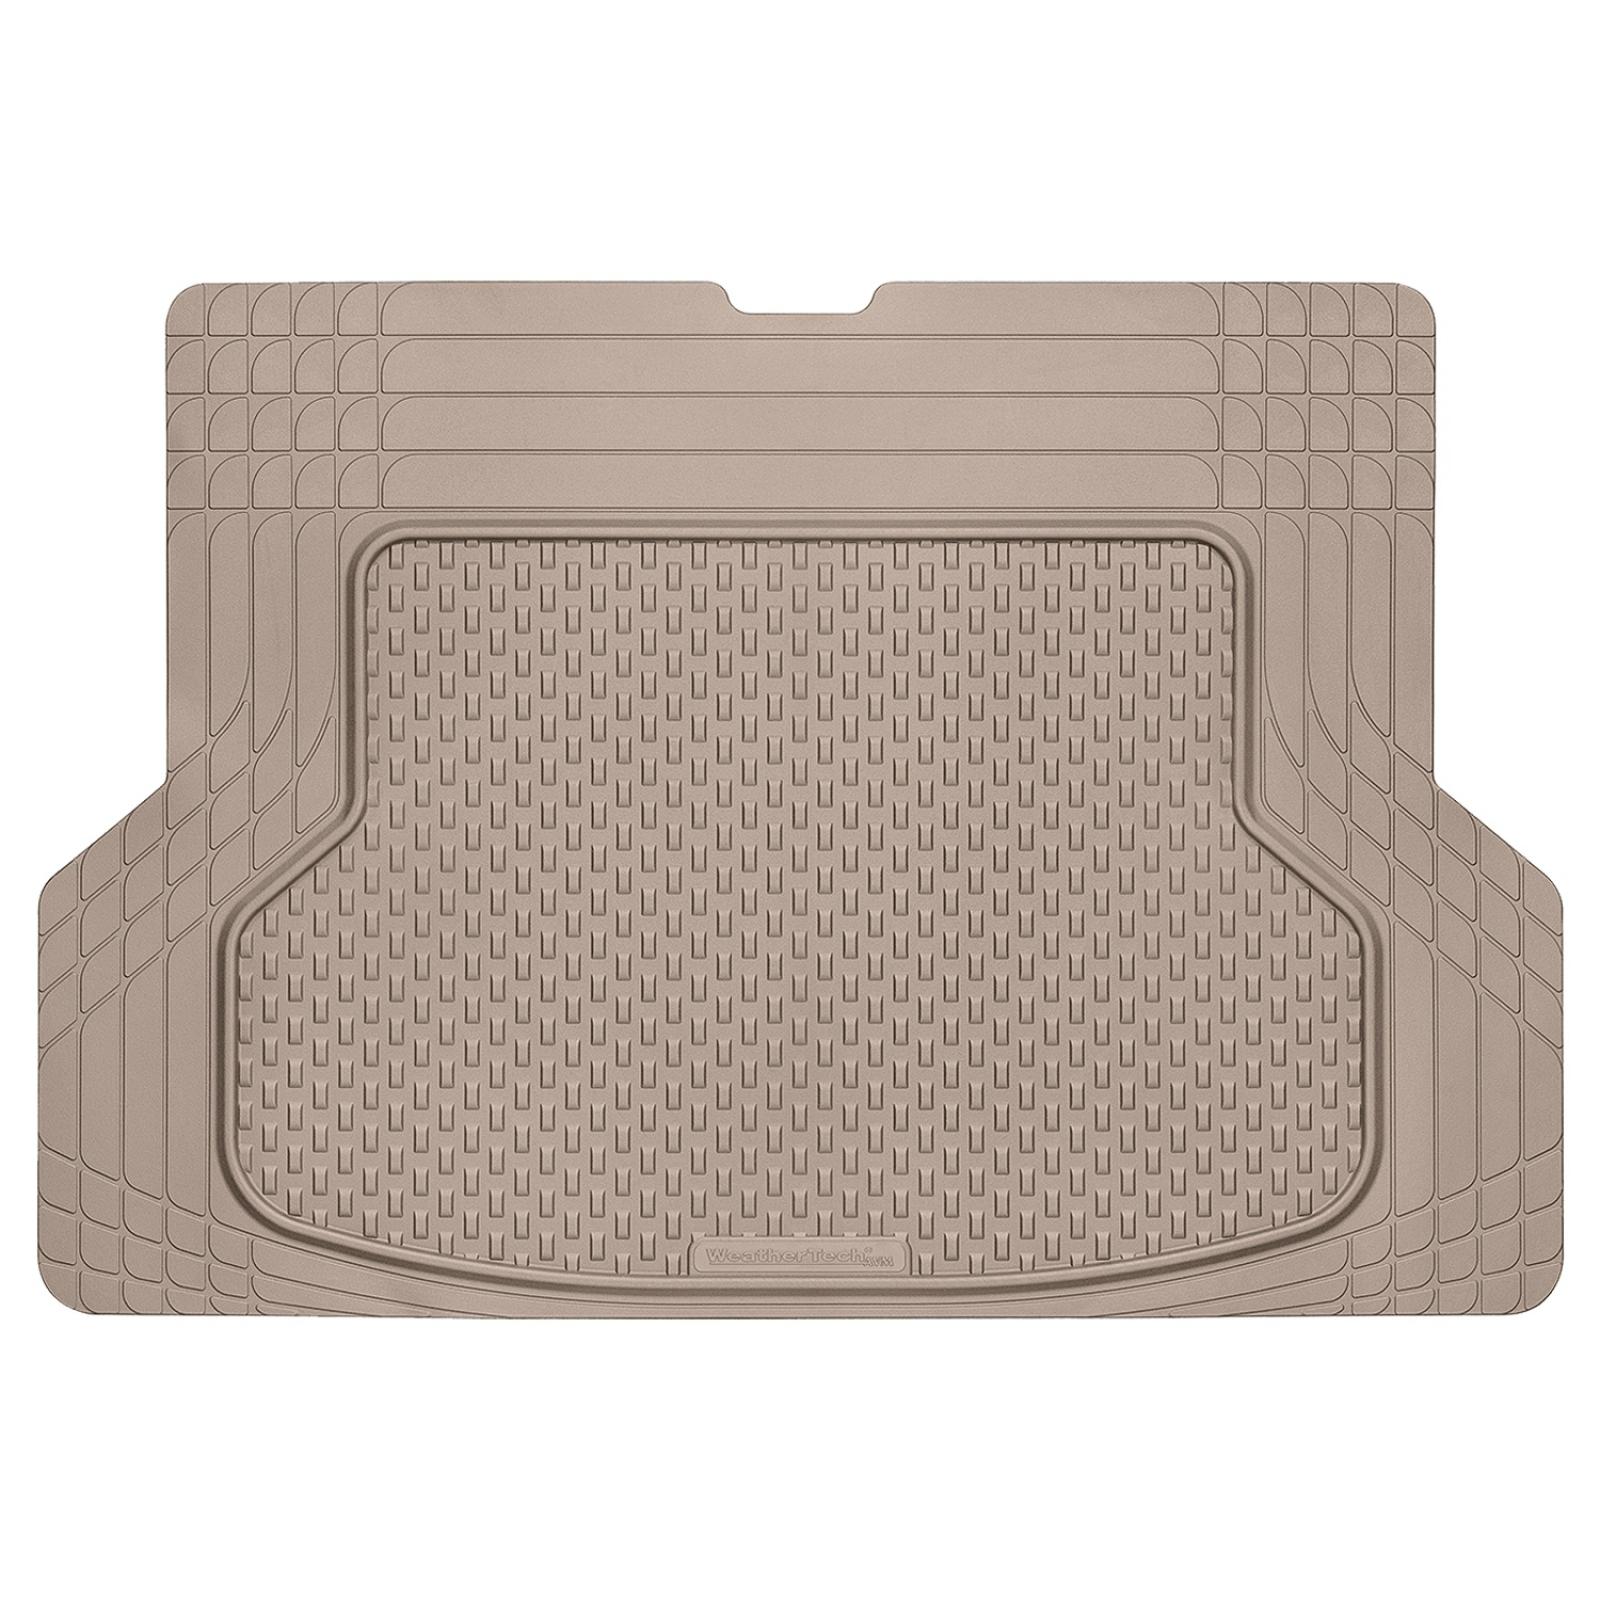 WeatherTech Trim-to-Fit Cargo Liner